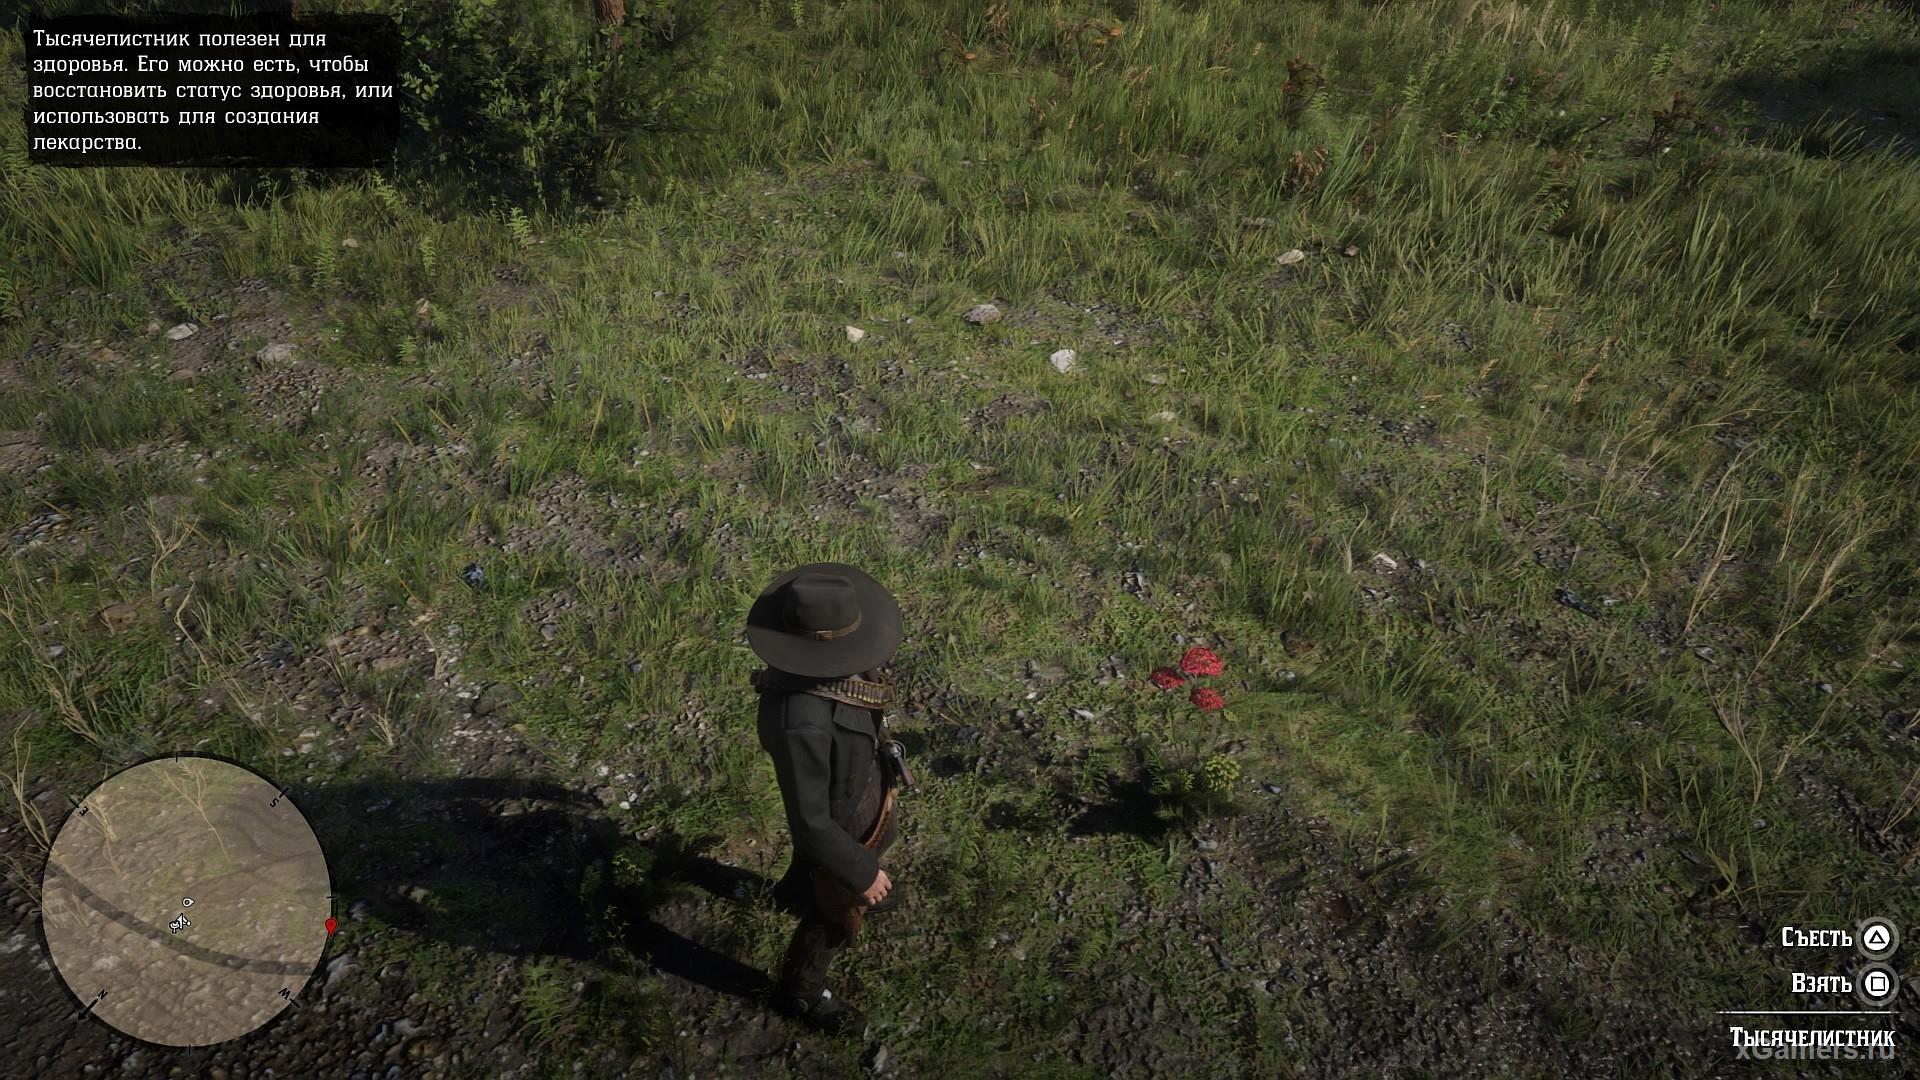 Yarrow in the game RDR 2